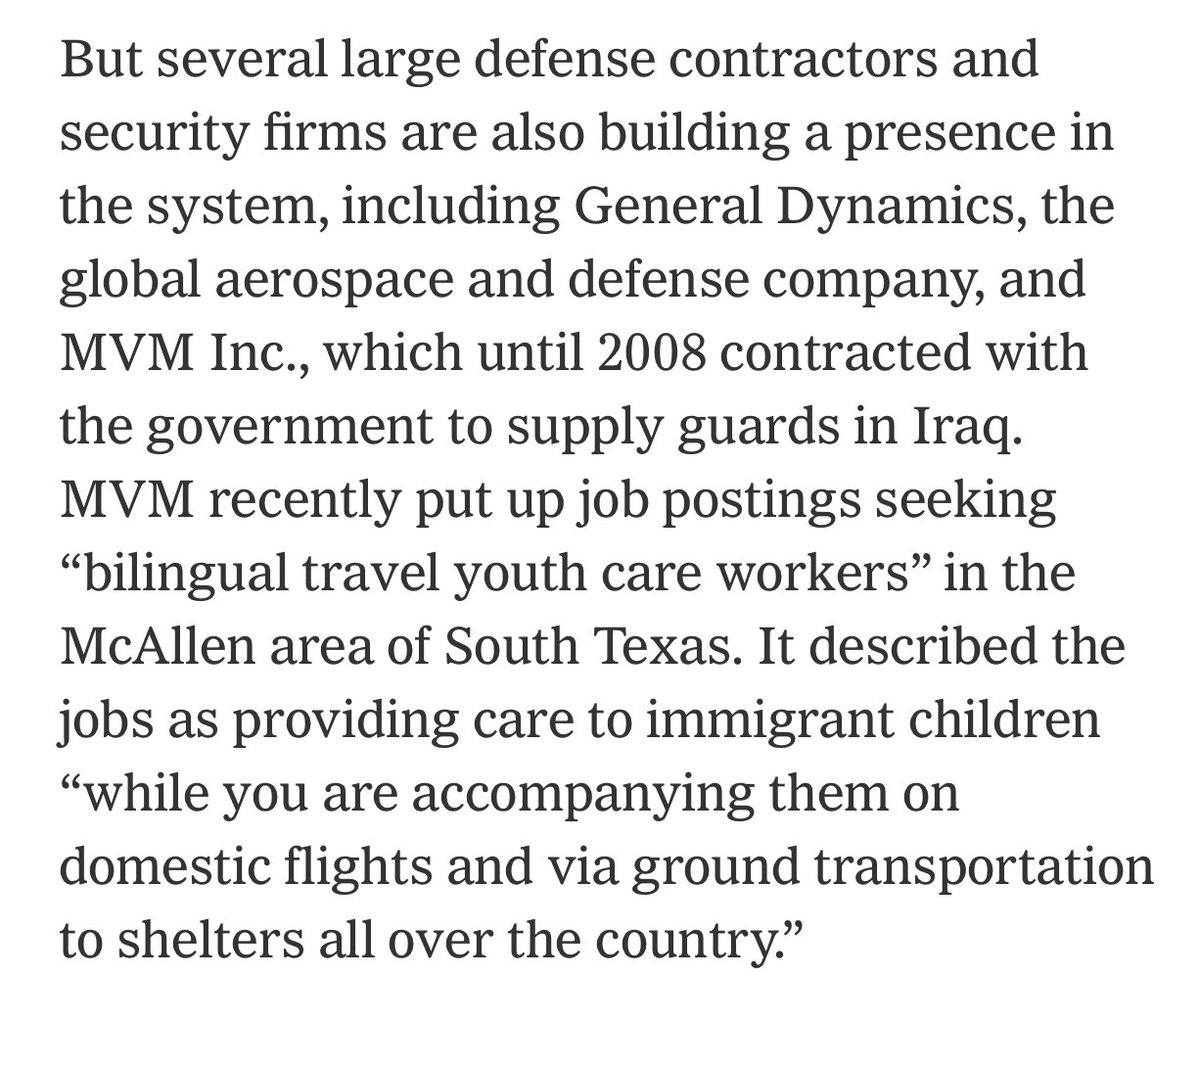 Lots of government contracts under Bush Jr admin including with MVM Inc  who are they....Until 2008 they contracted to supply guards in Iraq. Now they have ads looking for “bilingual travel youth care workers” in McAllen area of South Texas   to shelters all over 